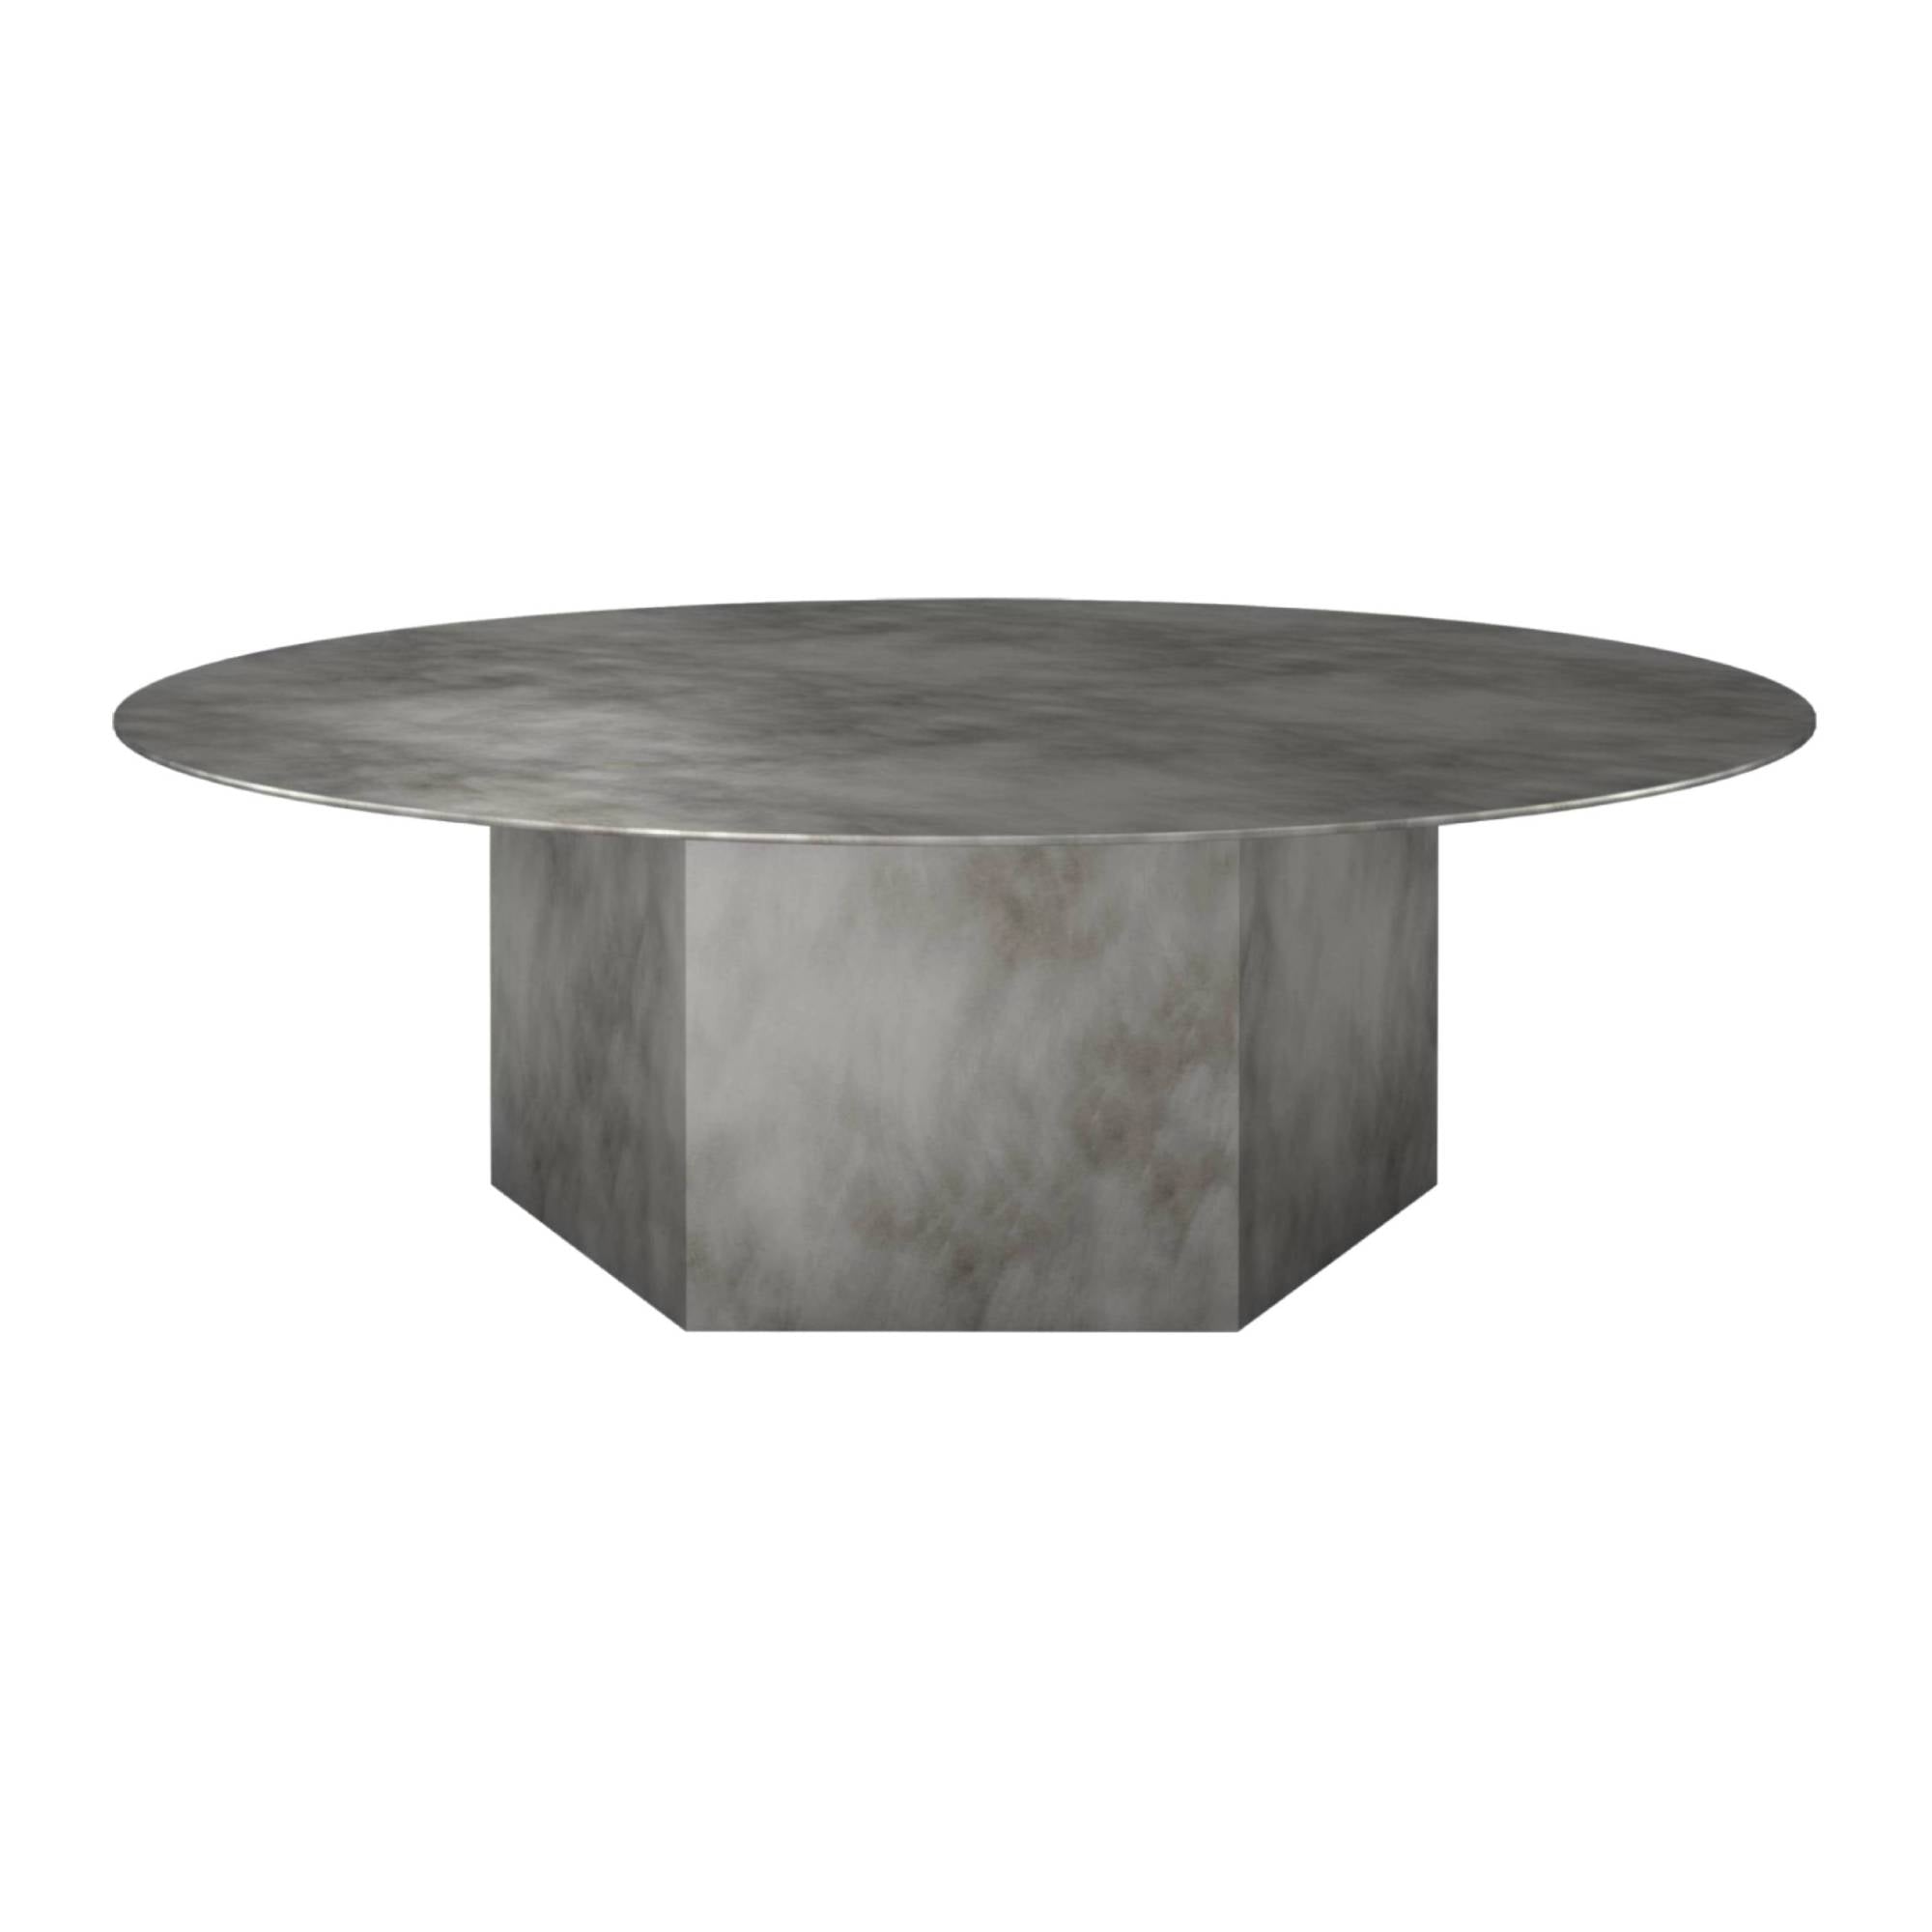 Epic Round Coffee Table: Steel + Large - 43.3